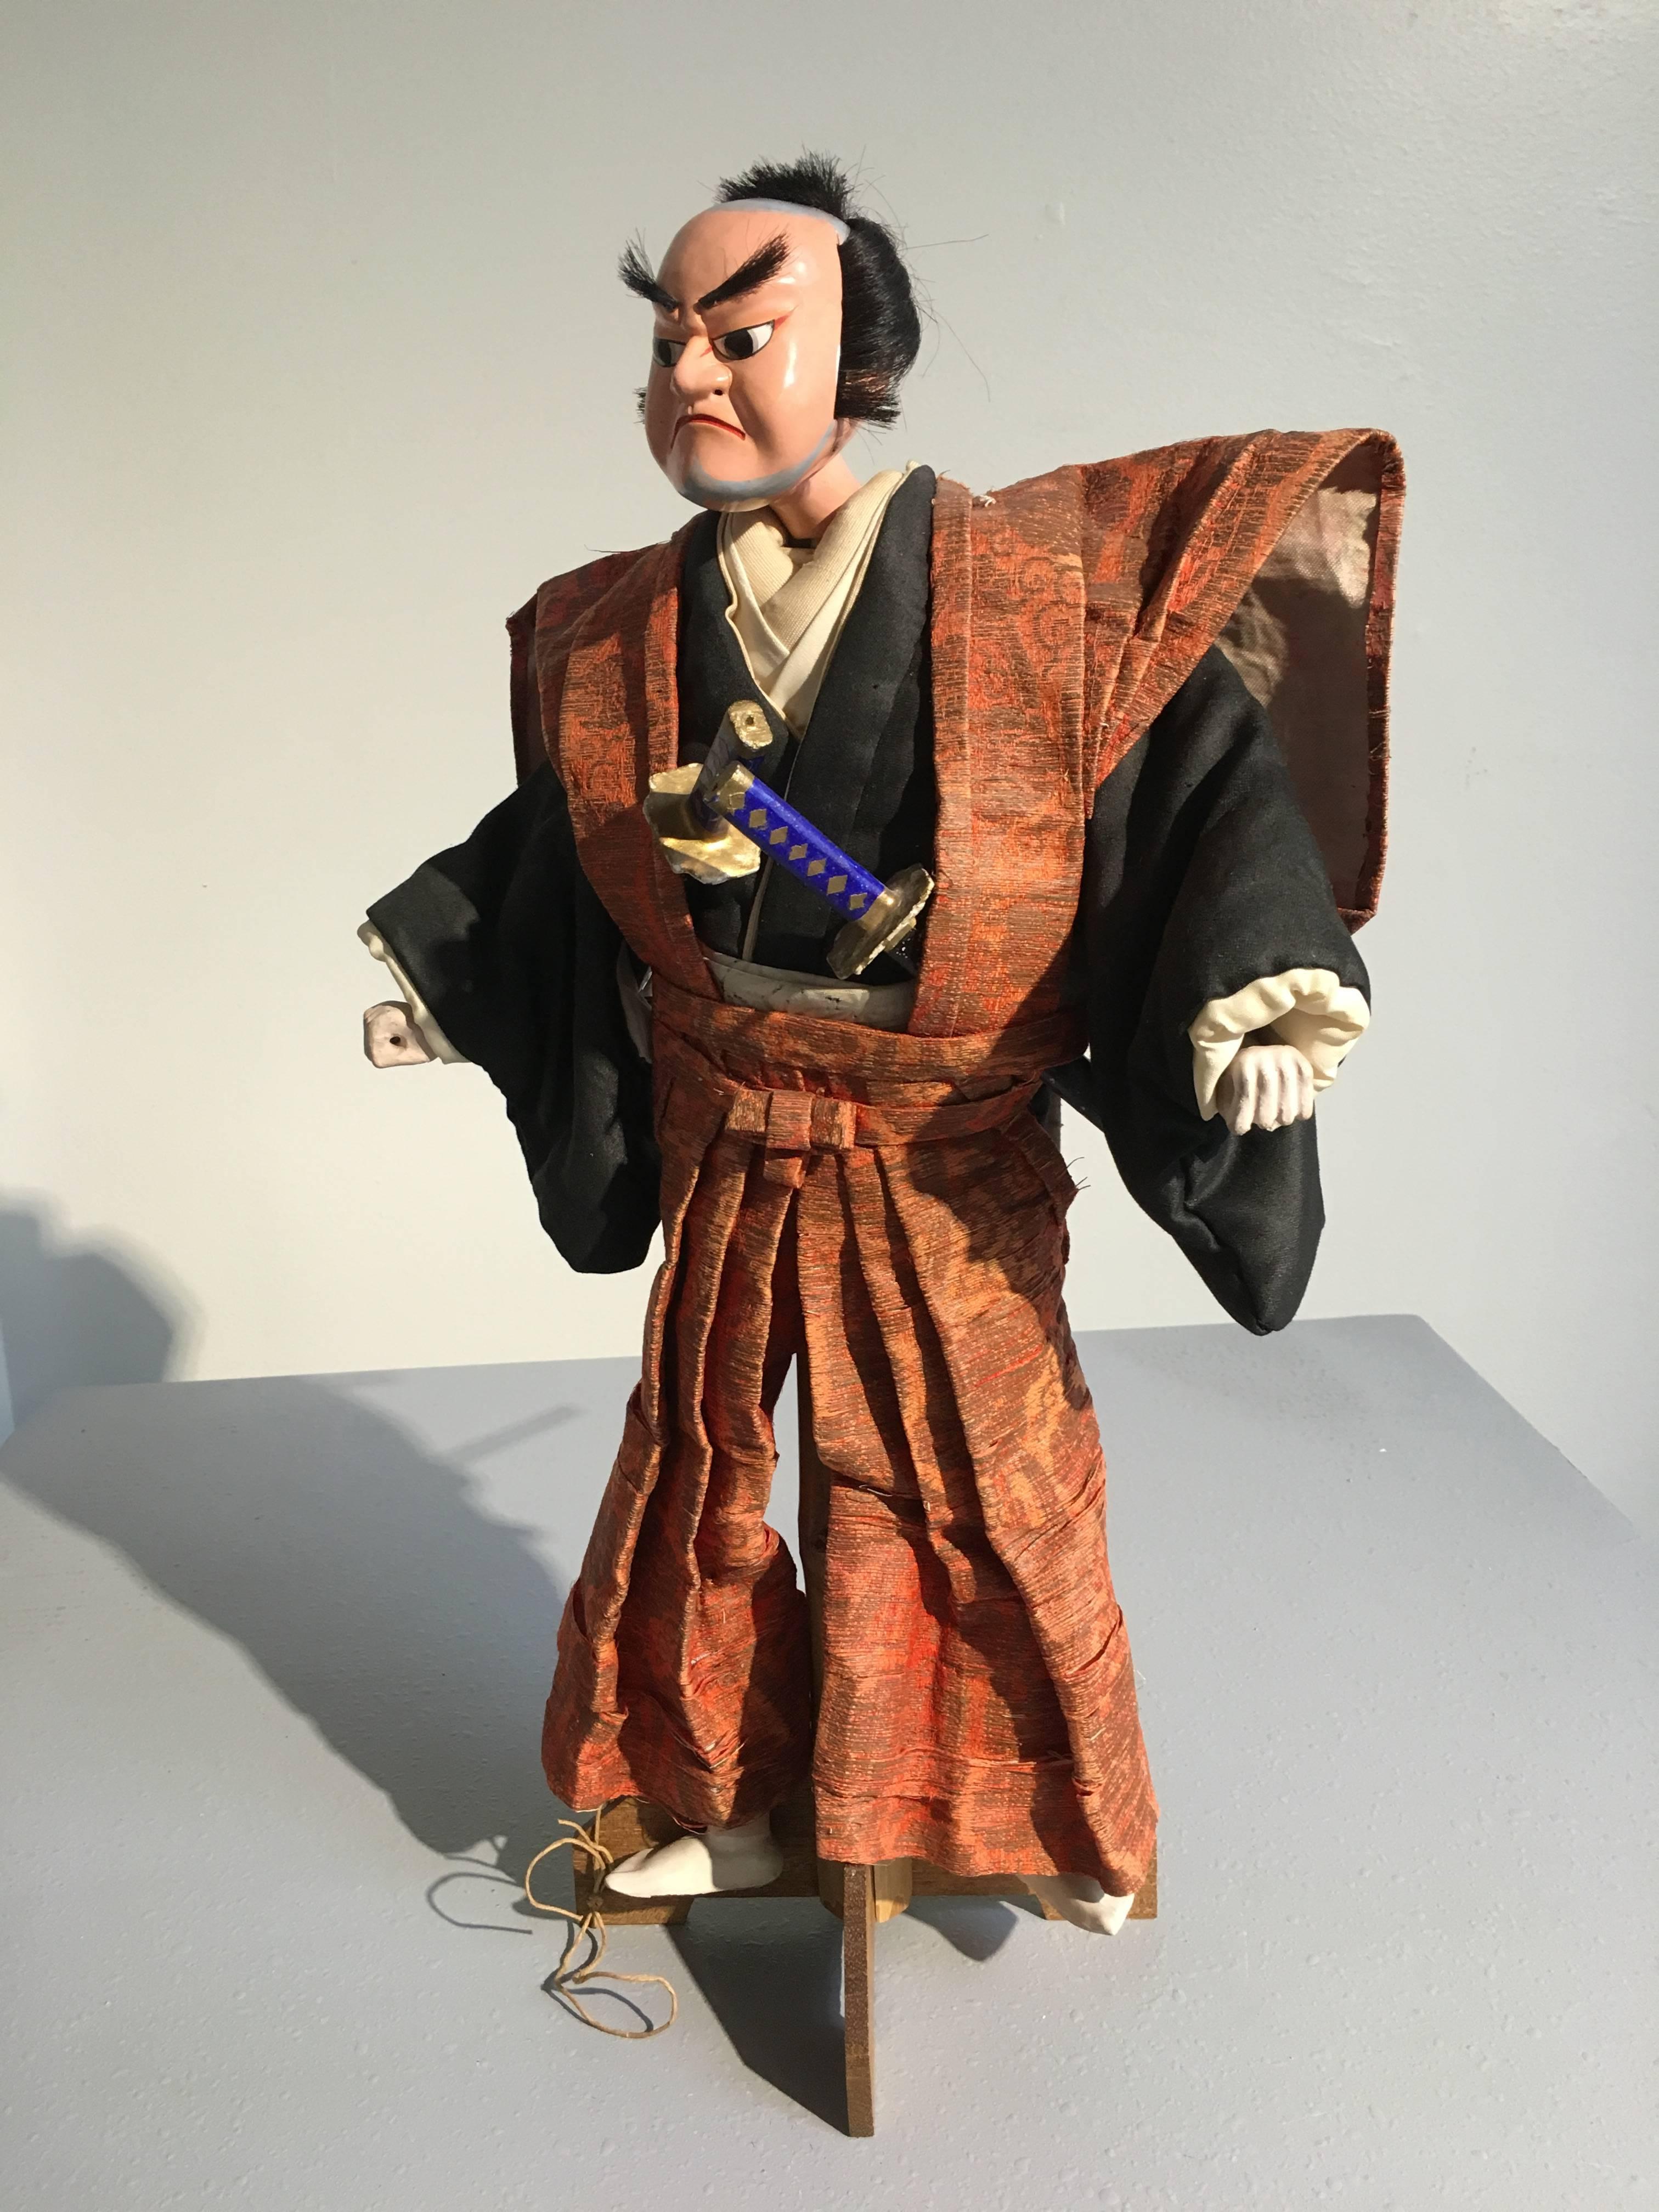 Created for Bunraku theatre, this Bunraku, known in Japan as a Ningyo Jorurui, depicts a samurai warrior. He is dressed in full kamishimo, with a kataginu and hakama of rich brocade featuring gold thread on a coral ground. A pair of removable swords